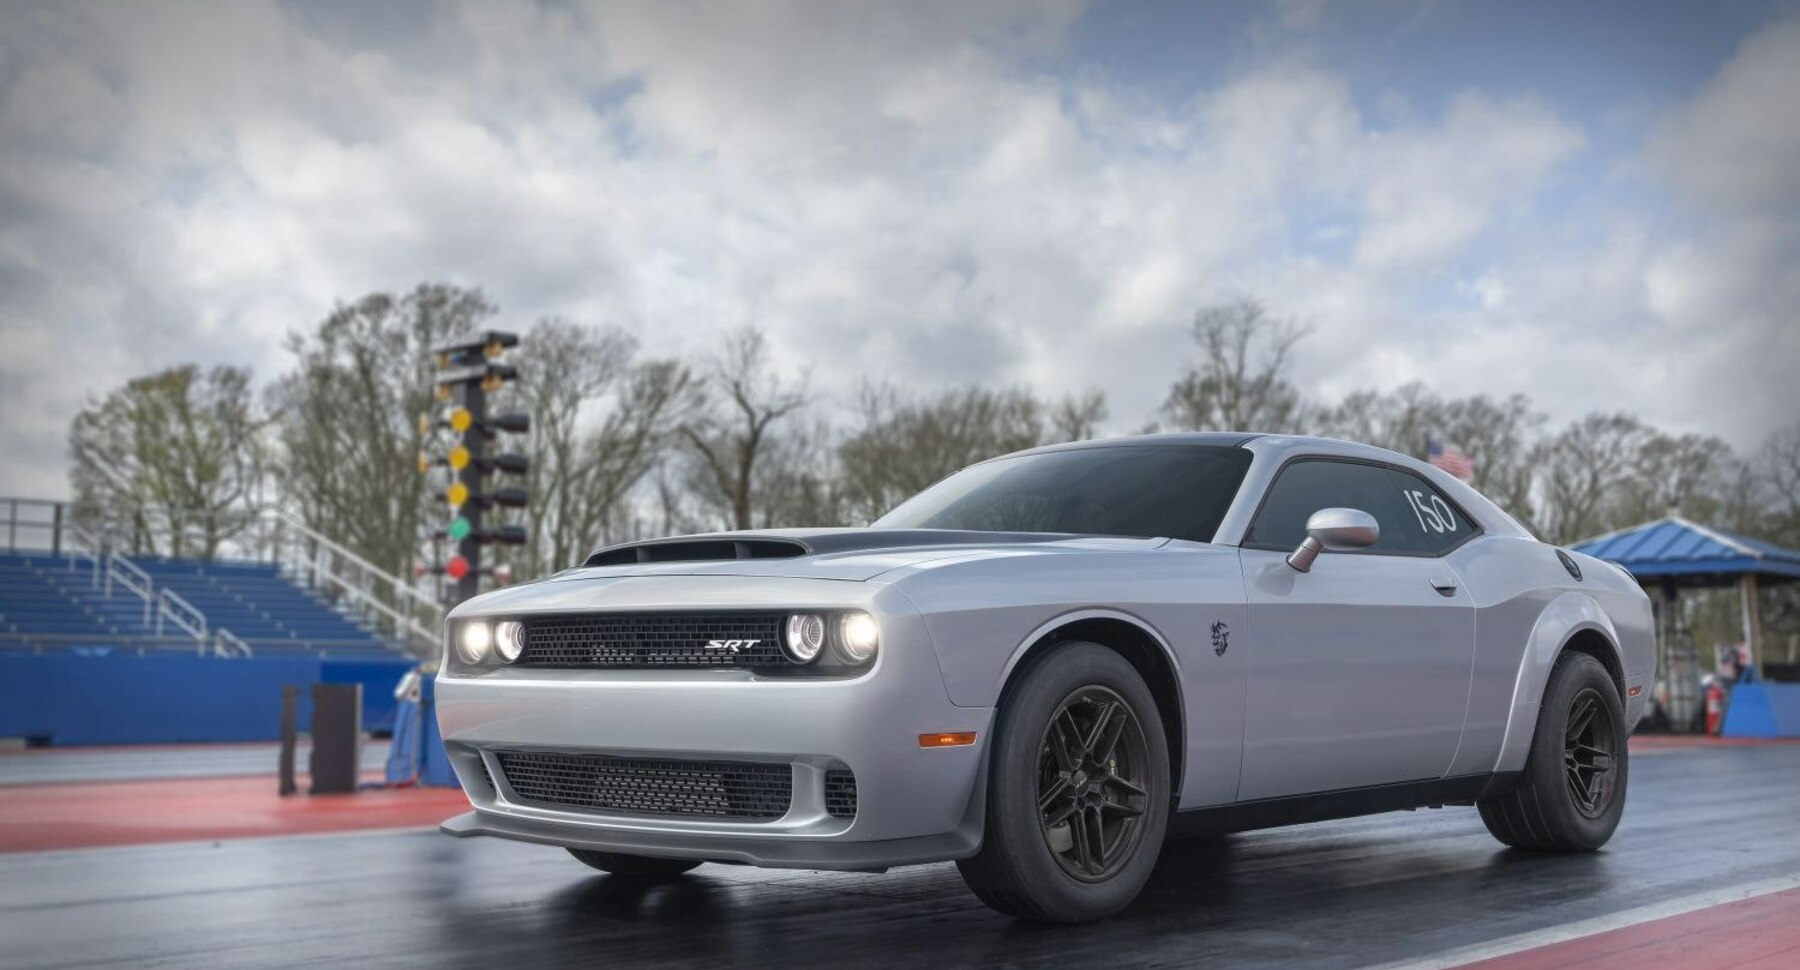 Dodge Challenger III (facelift 2014) R/T Scat Pack 6.4 HEMI V8 (485 Hp) Automatic 2015, 2016, 2017, 2018, 2019, 2020, 2021 